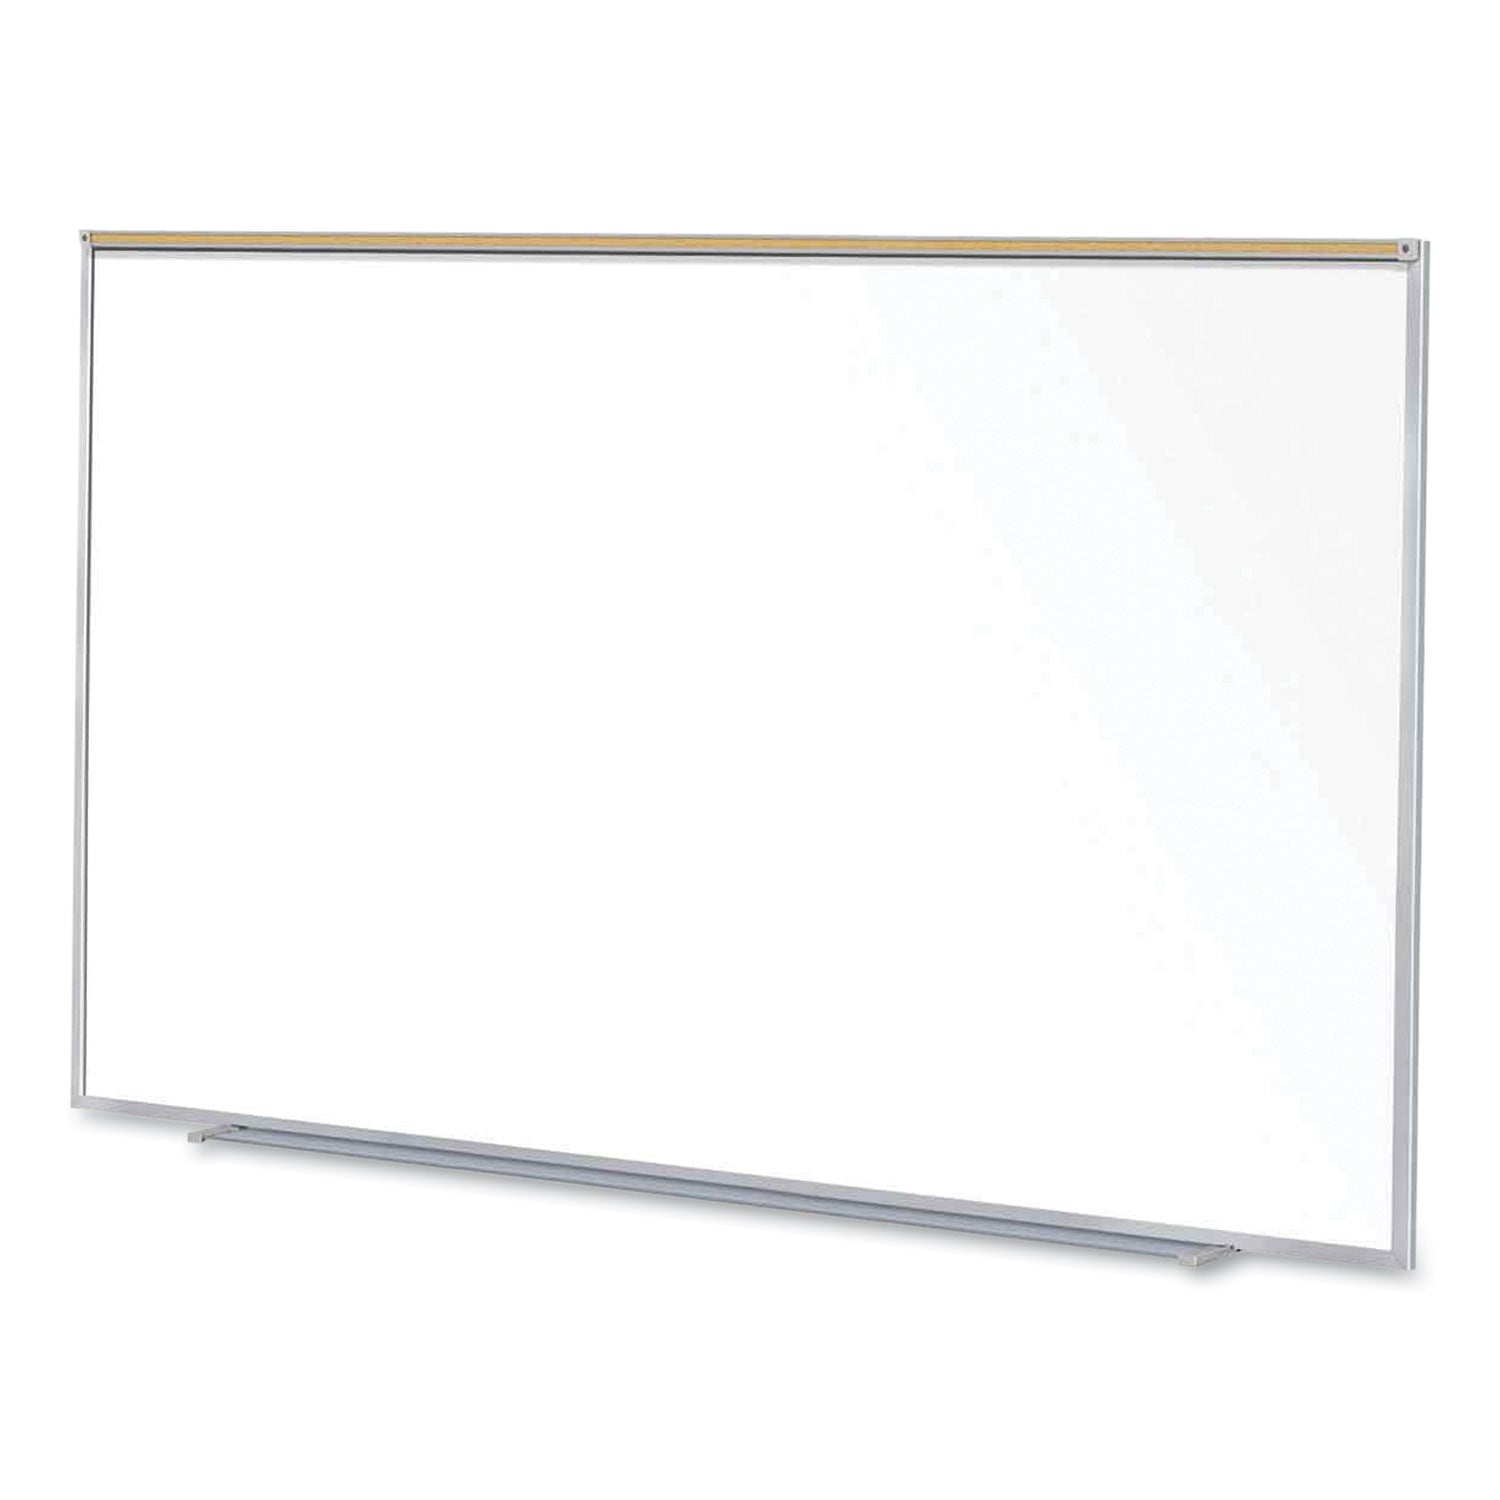 magnetic-porcelain-whiteboard-with-satin-aluminum-frame-and-map-rail-9653-x-6047-white-surface-ships-in-7-10-bus-days_ghem1p581m - 2